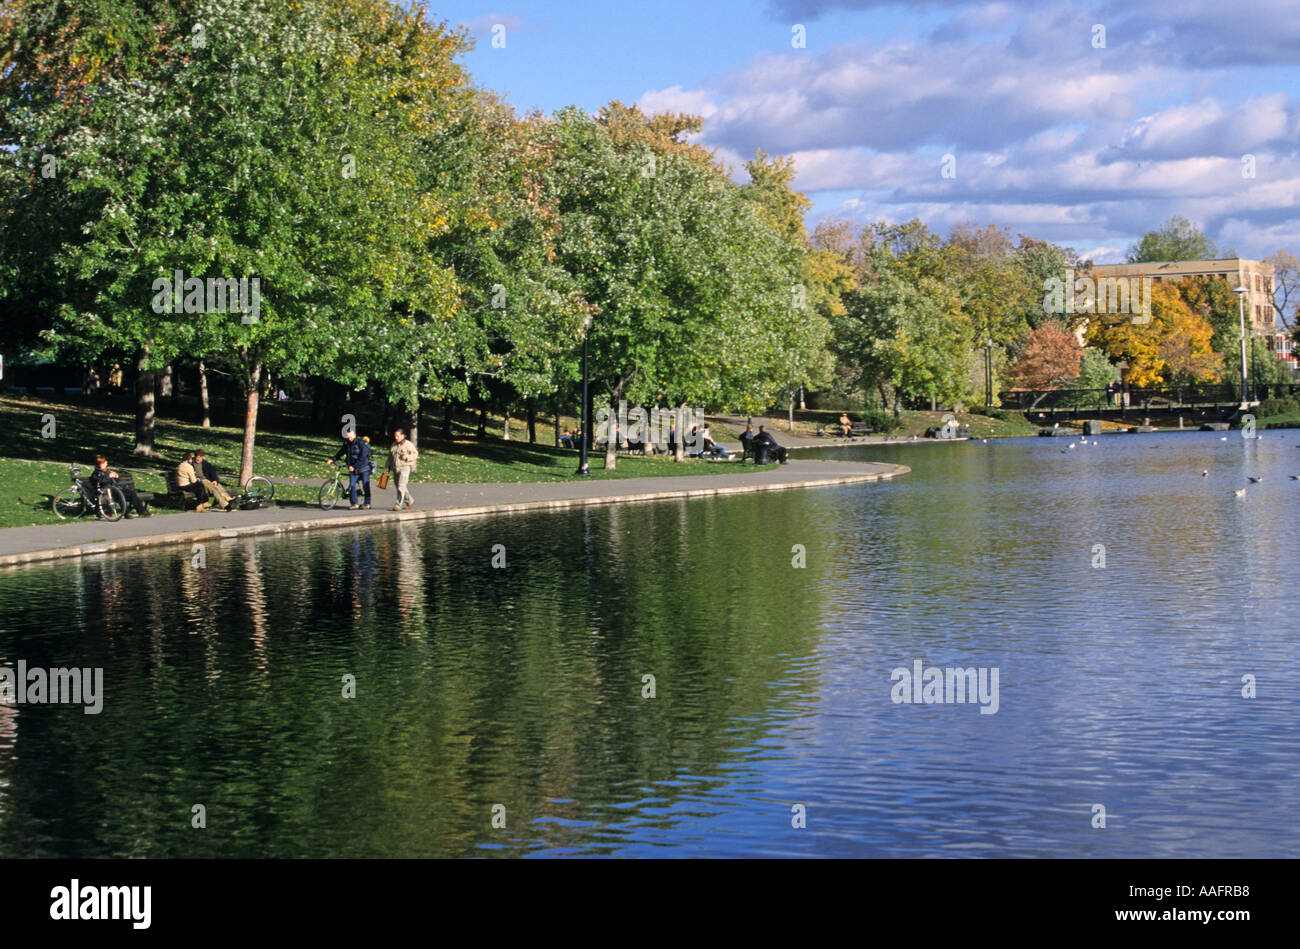 Indian summer in lafontaine park in montreal town Québec Canada Stock Photo